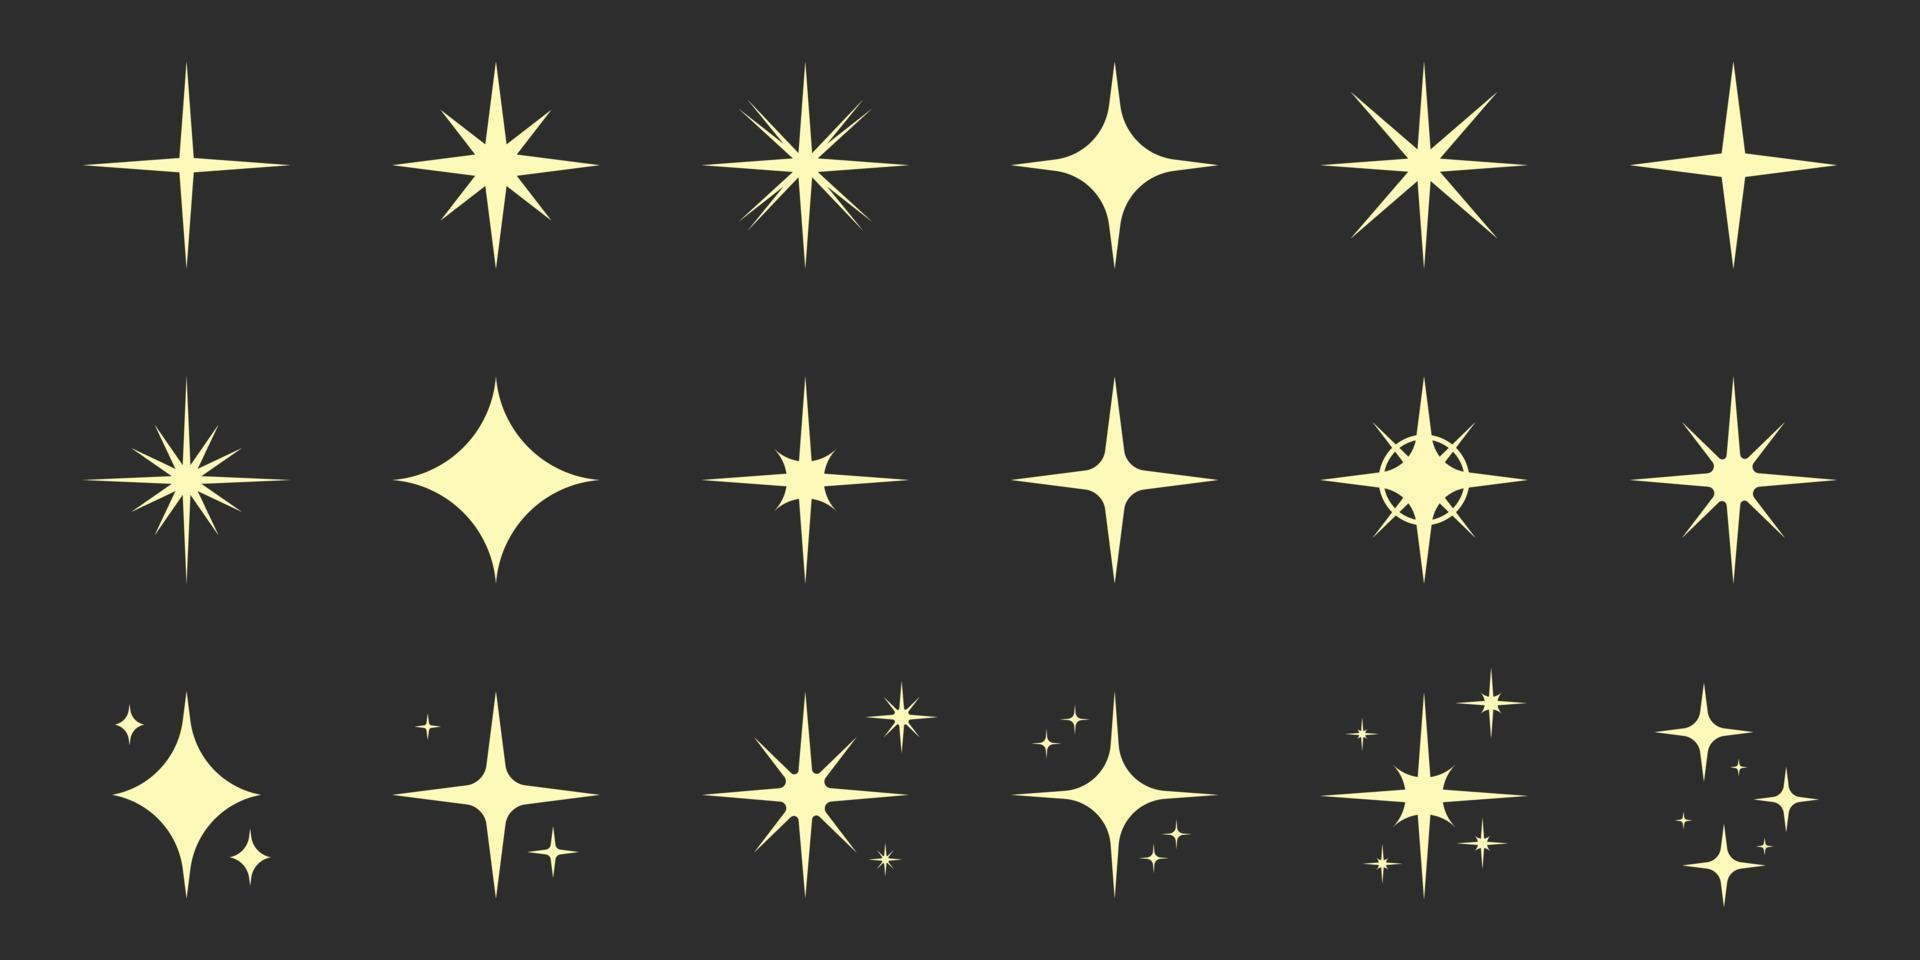 Sparkle Gold Star Silhouette Icon Set. Glow Spark Flash Stars Pictogram Collection. Shine Burst Magic Decoration Symbol. Glistering Effect Light. Golden Twinkle Flare. Isolated Vector Illustration.